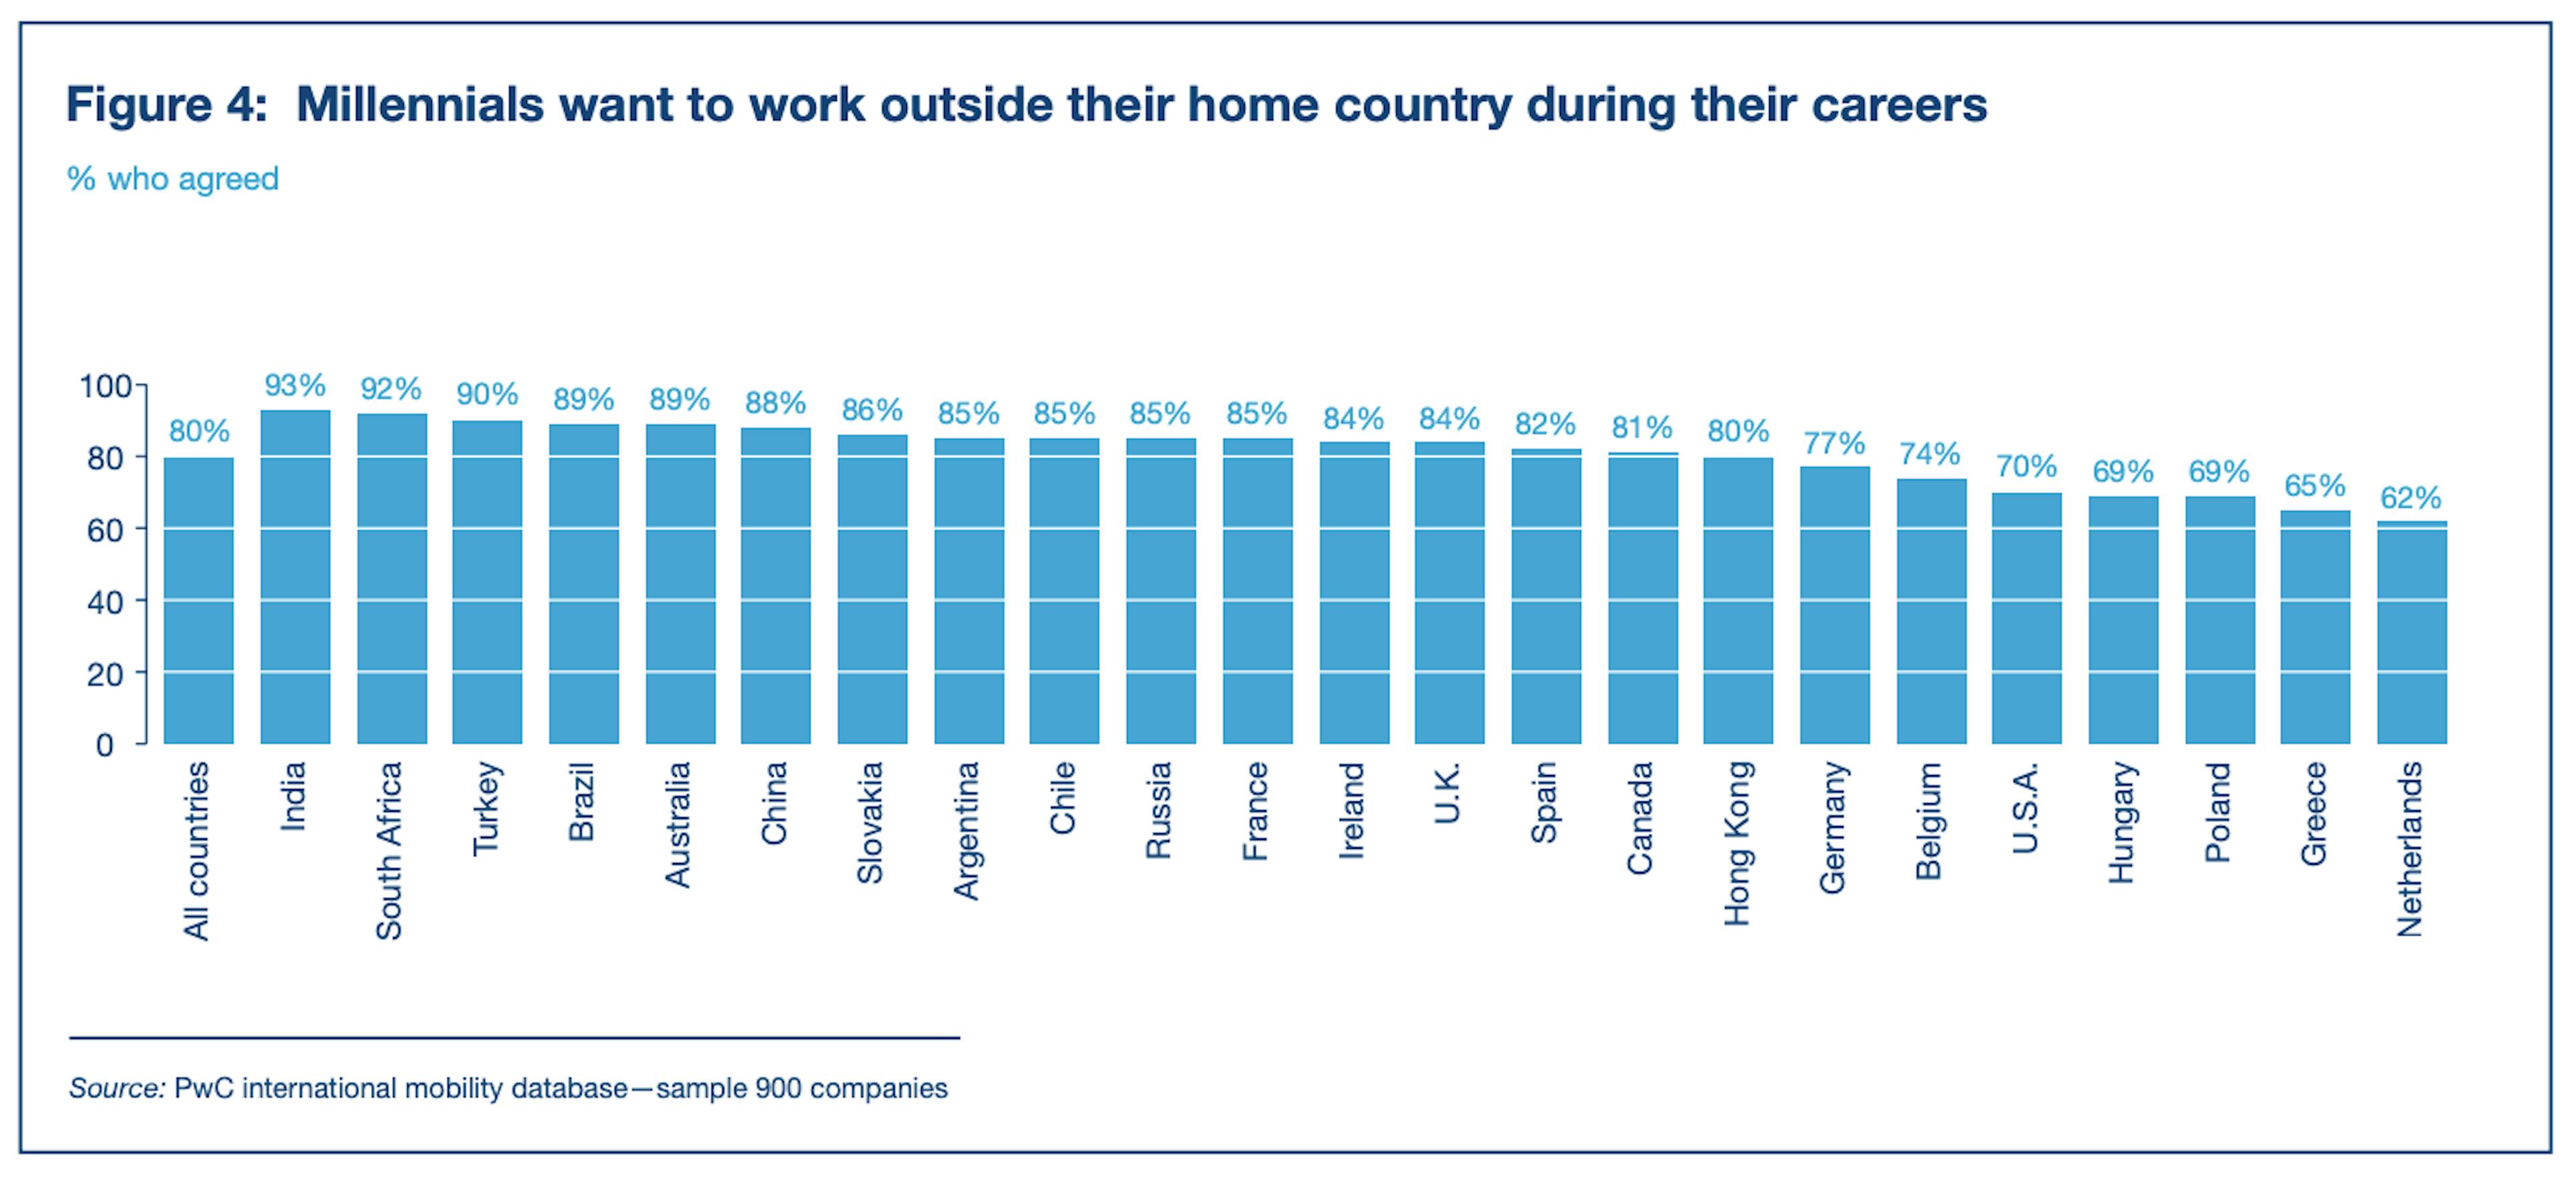 Bar graph showing the percentage of millennials who want to work outside their home country during their careers